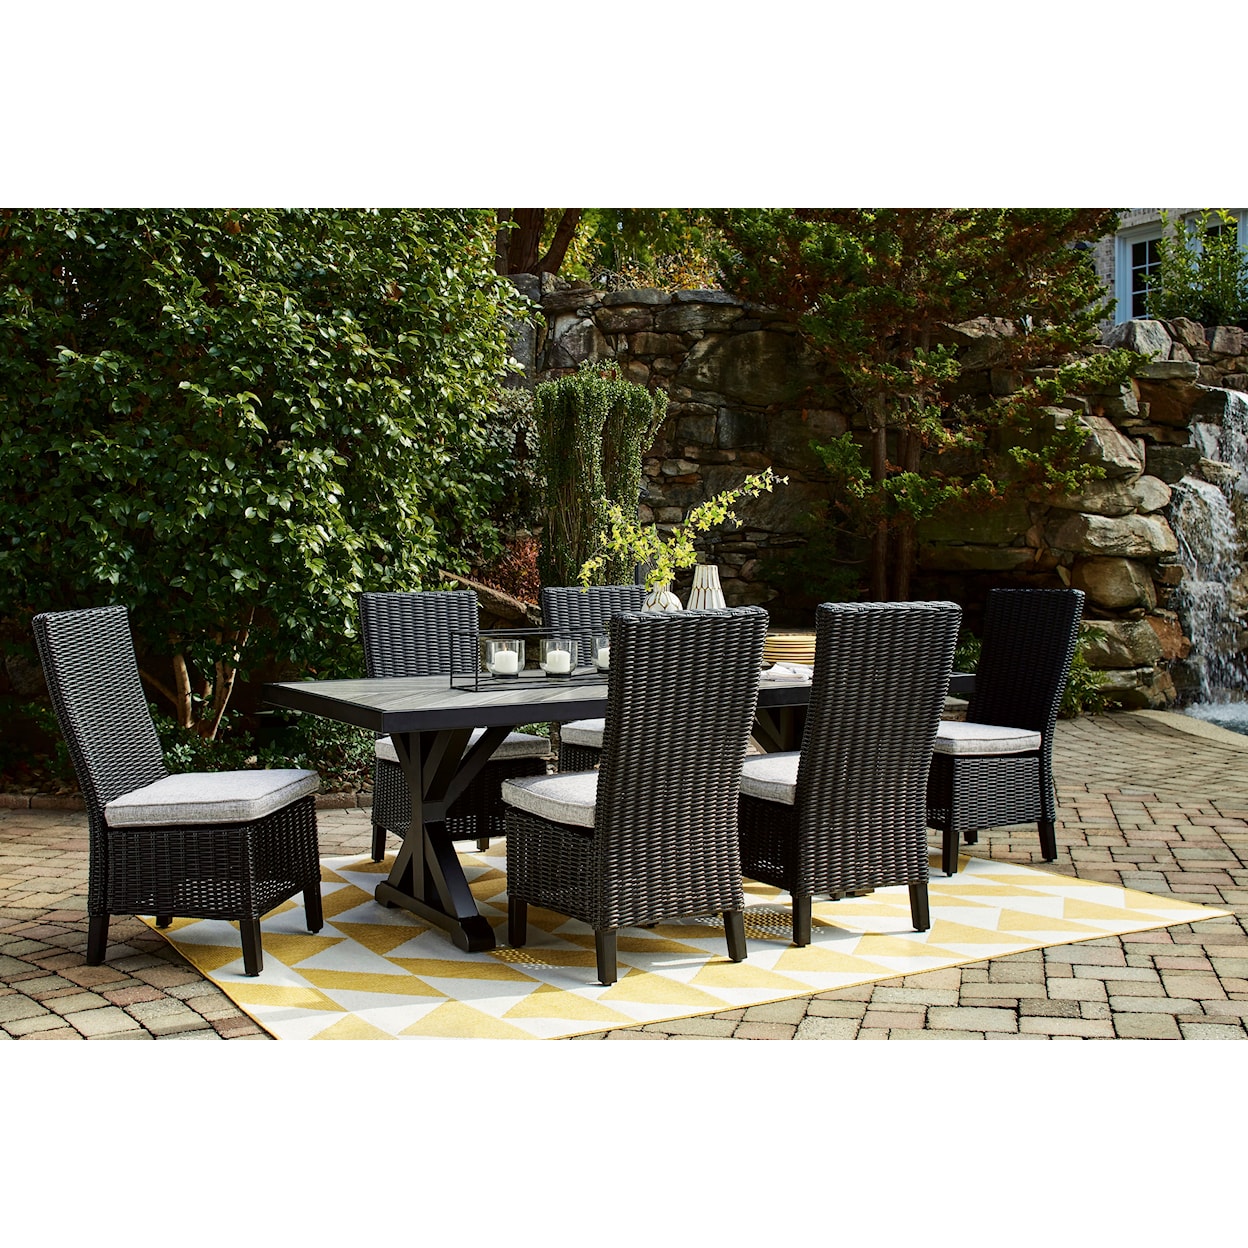 Belfort Select Bethany Outdoor Dining Table with 6 Chairs